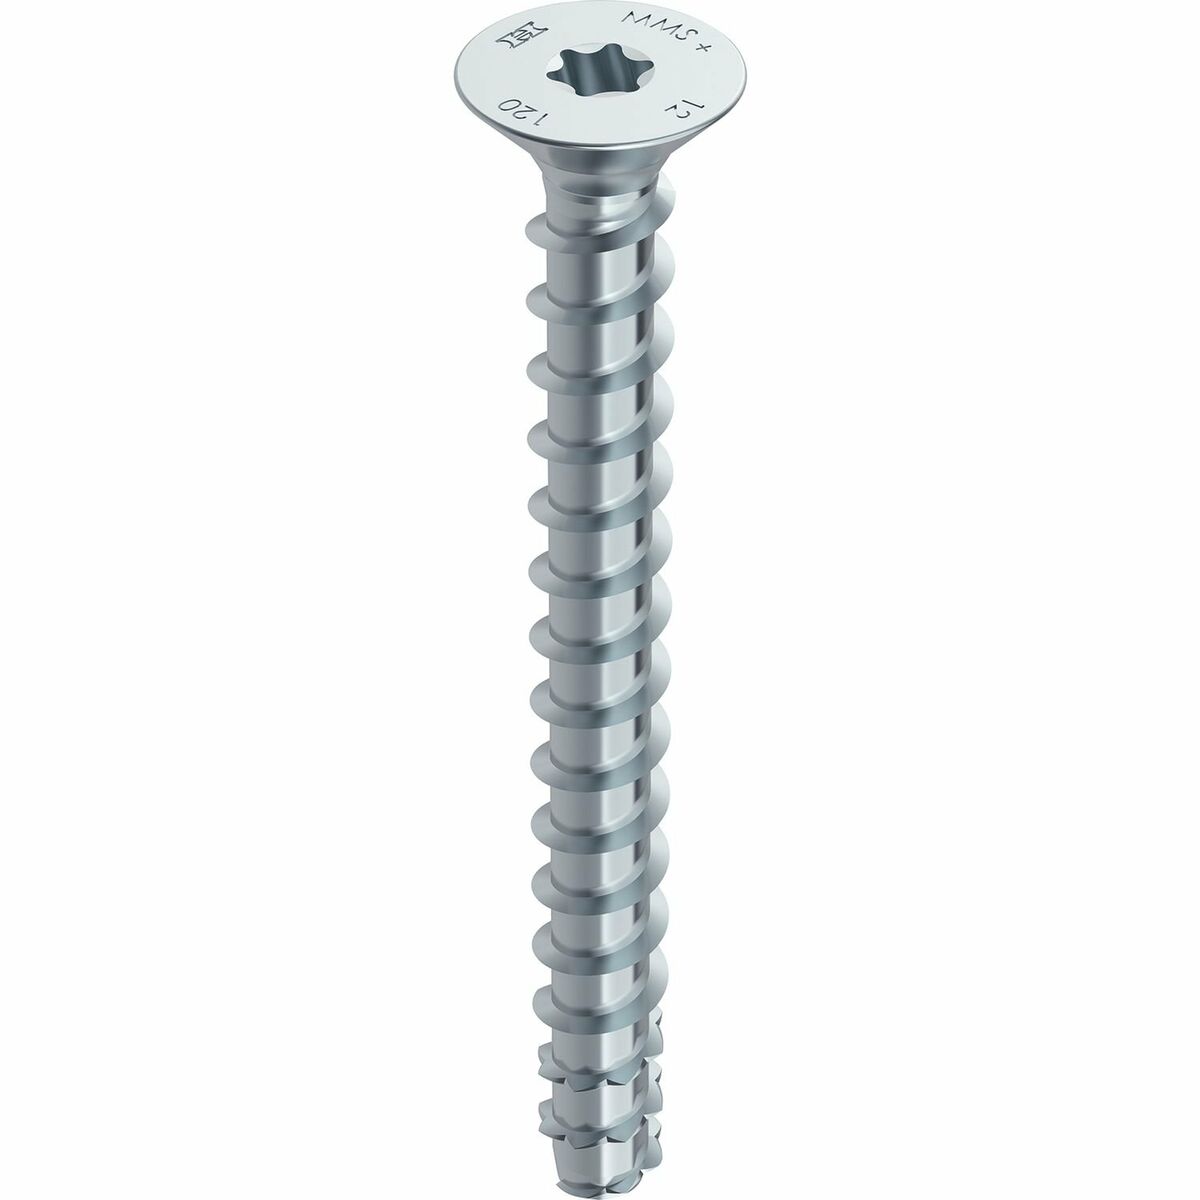 Screw set (Refurbished Products A)